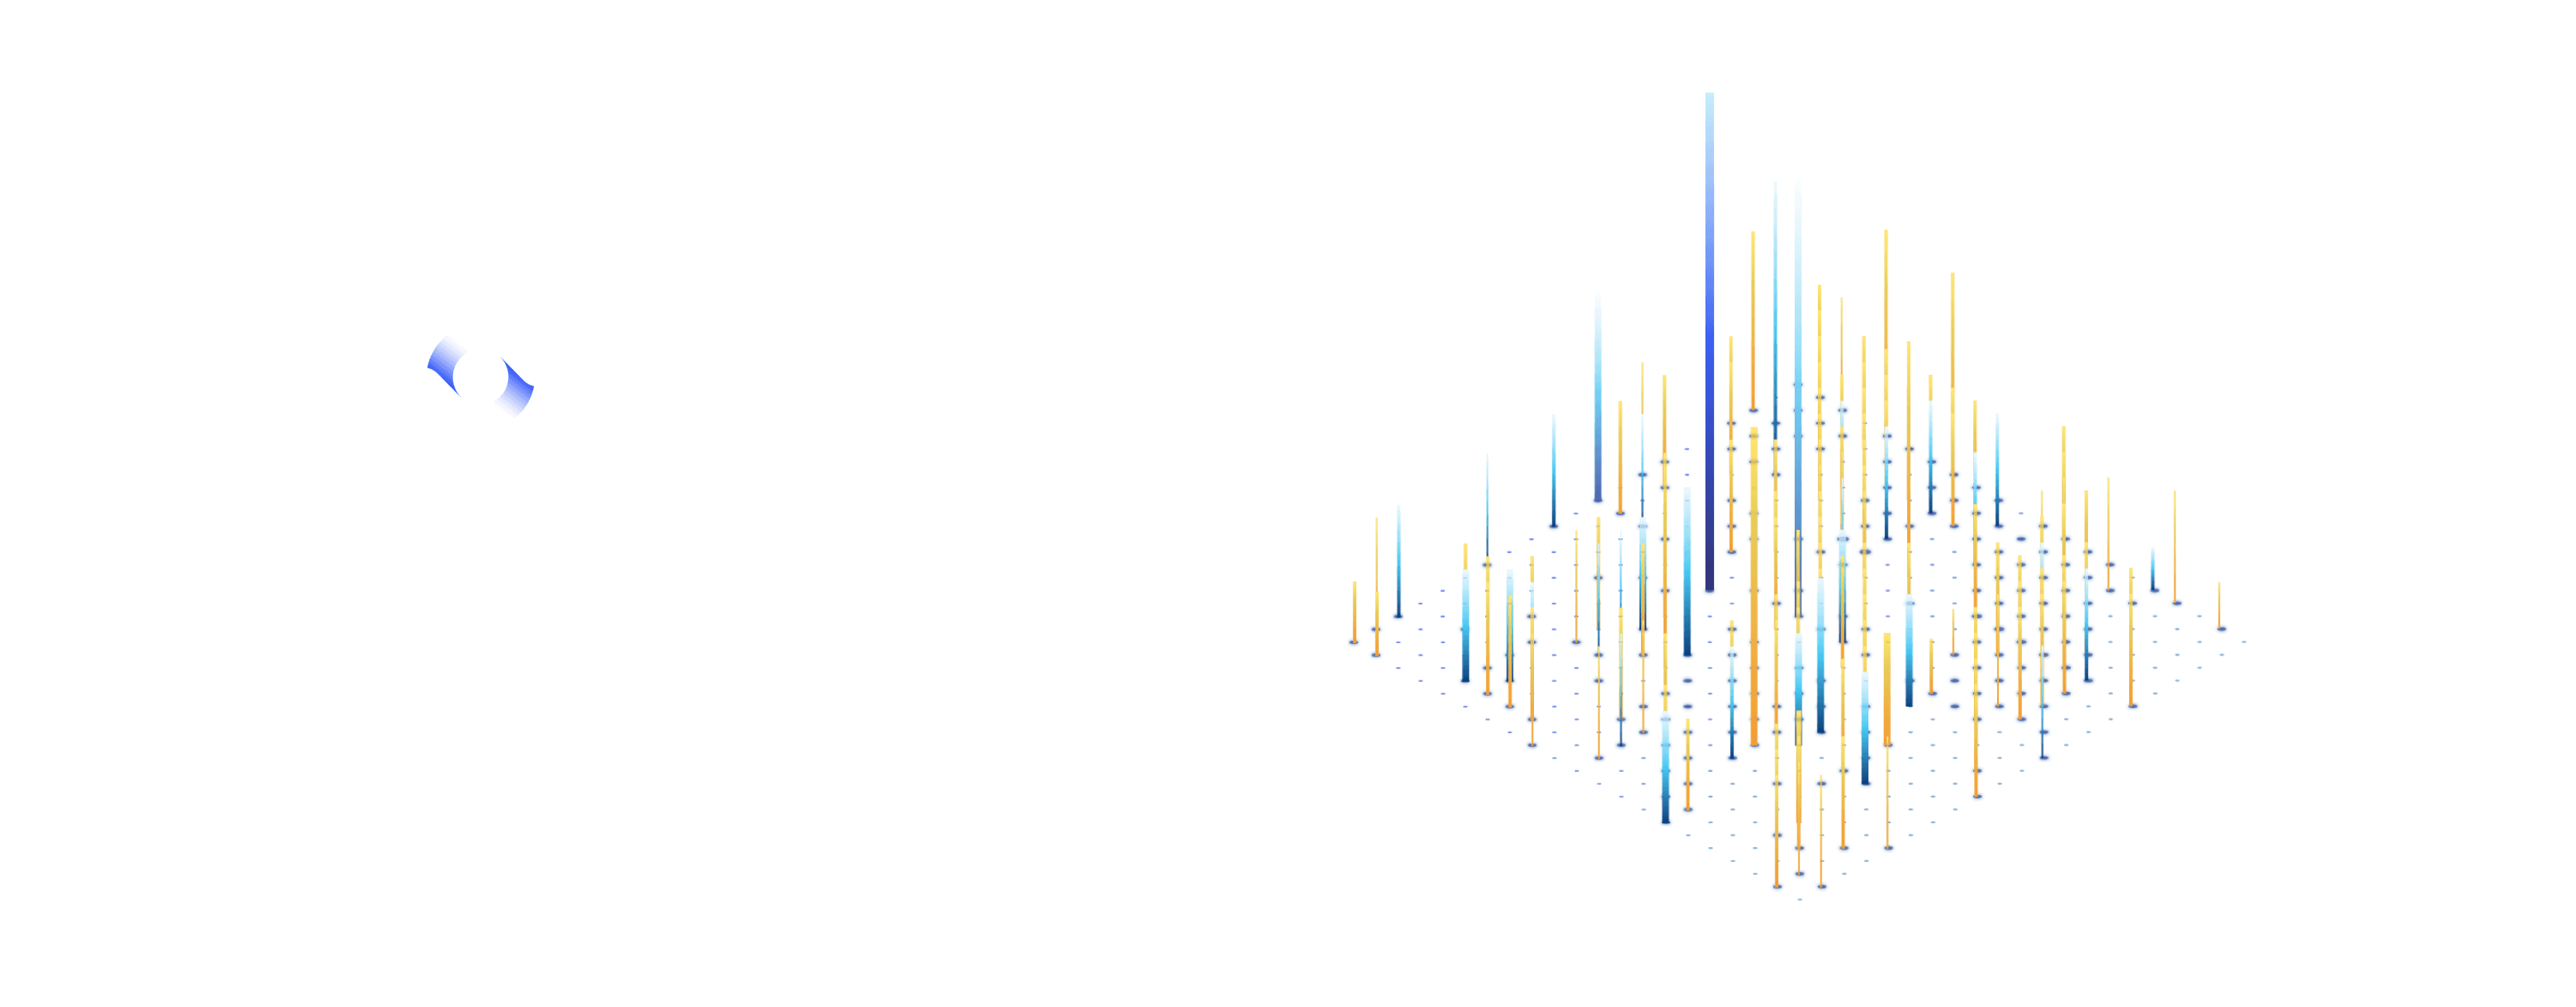 AuditBoard Ranked Third on Deloitte’s 2019 Technology Fast 500™